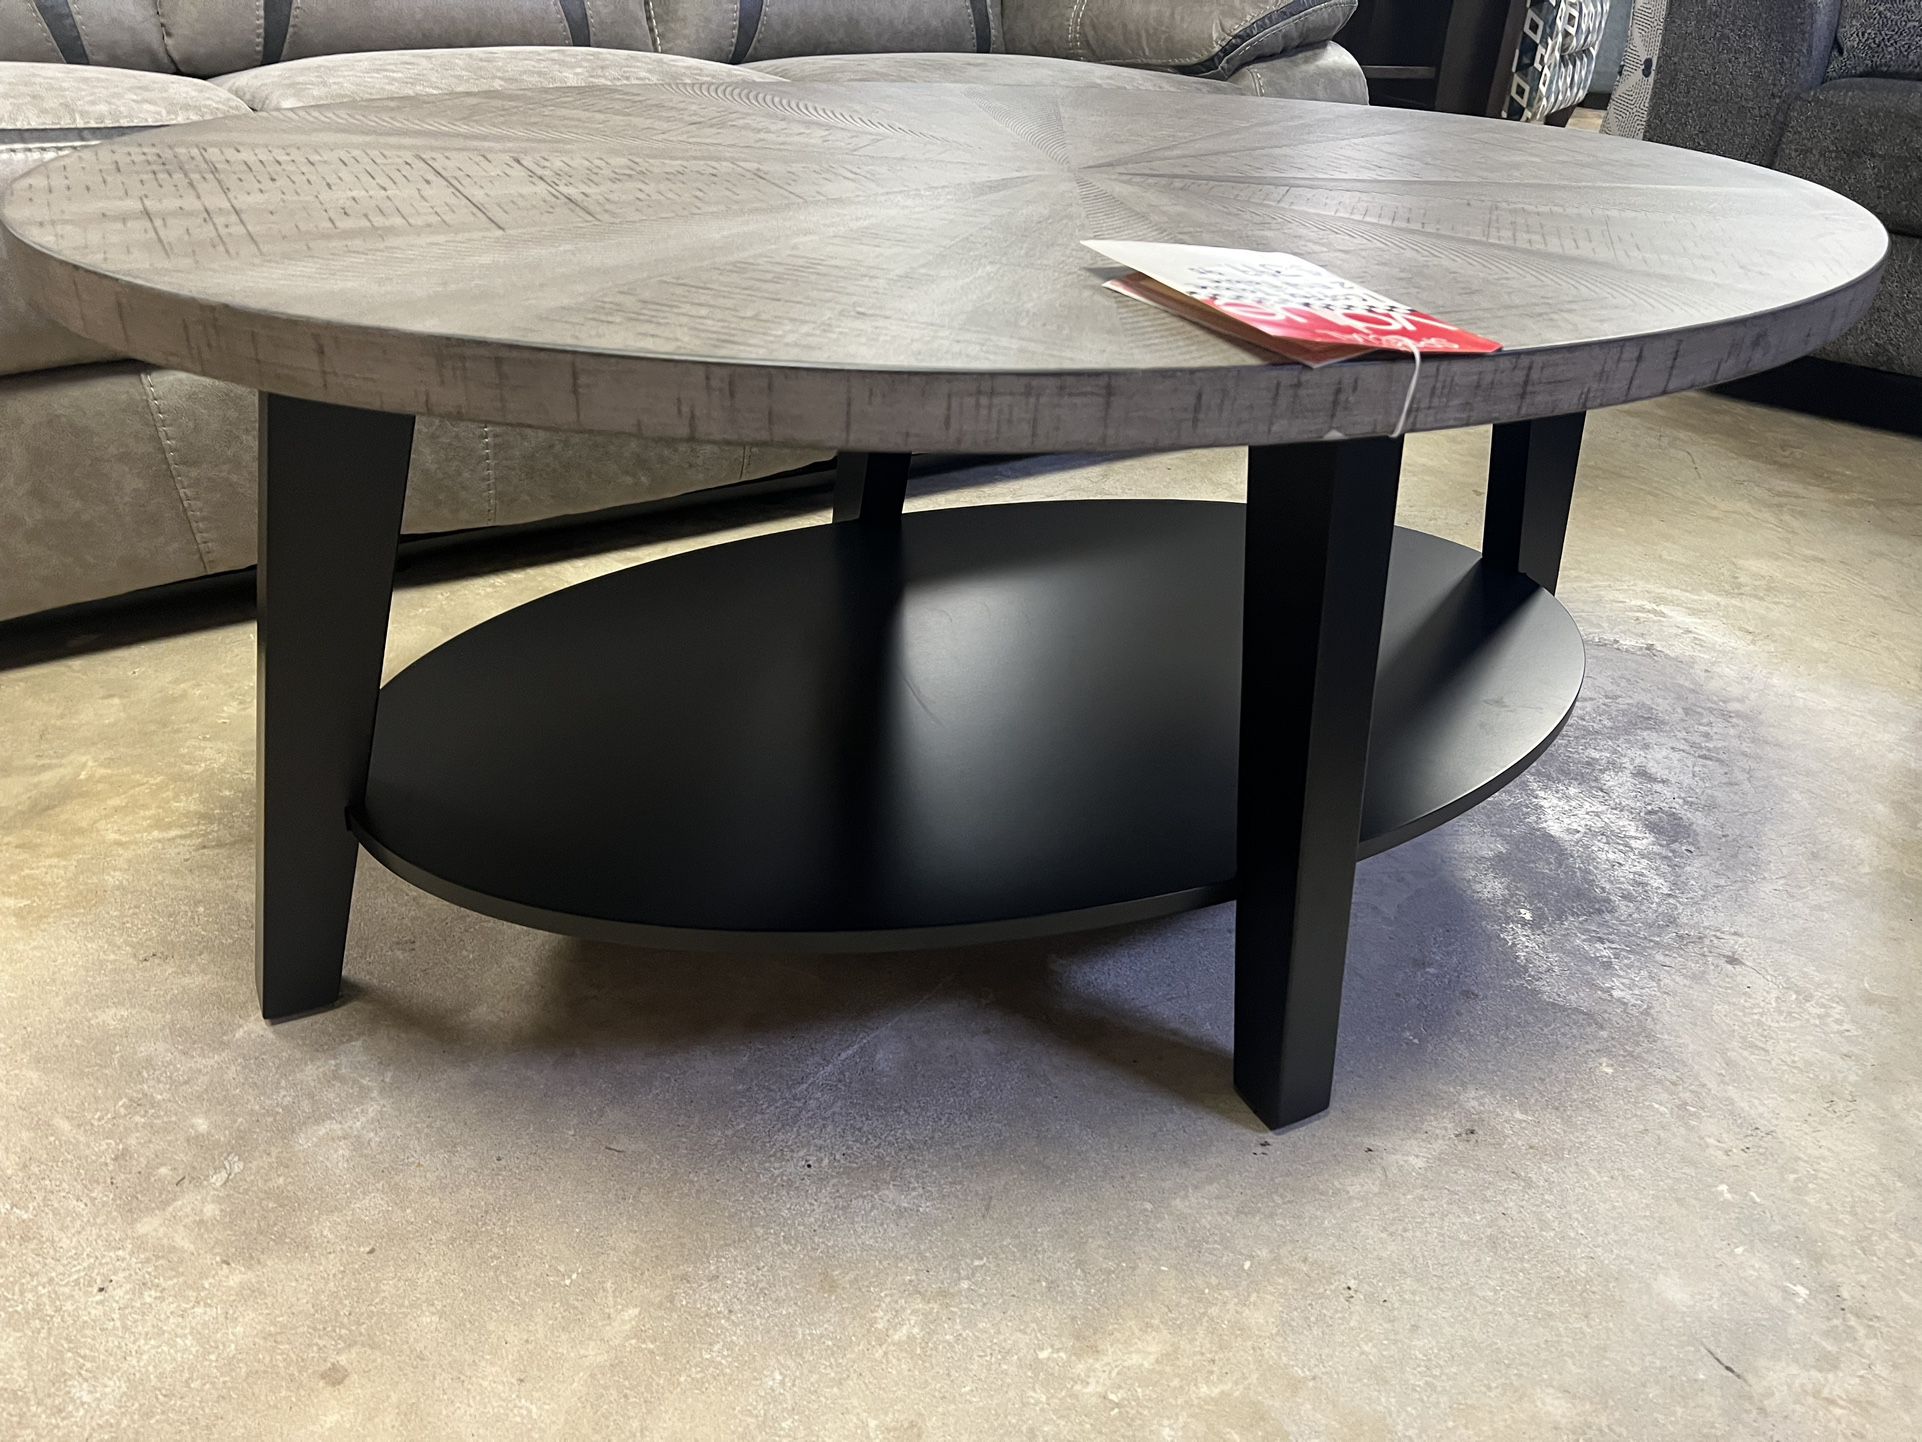 2 End Table 1 Coffee Table $399.95